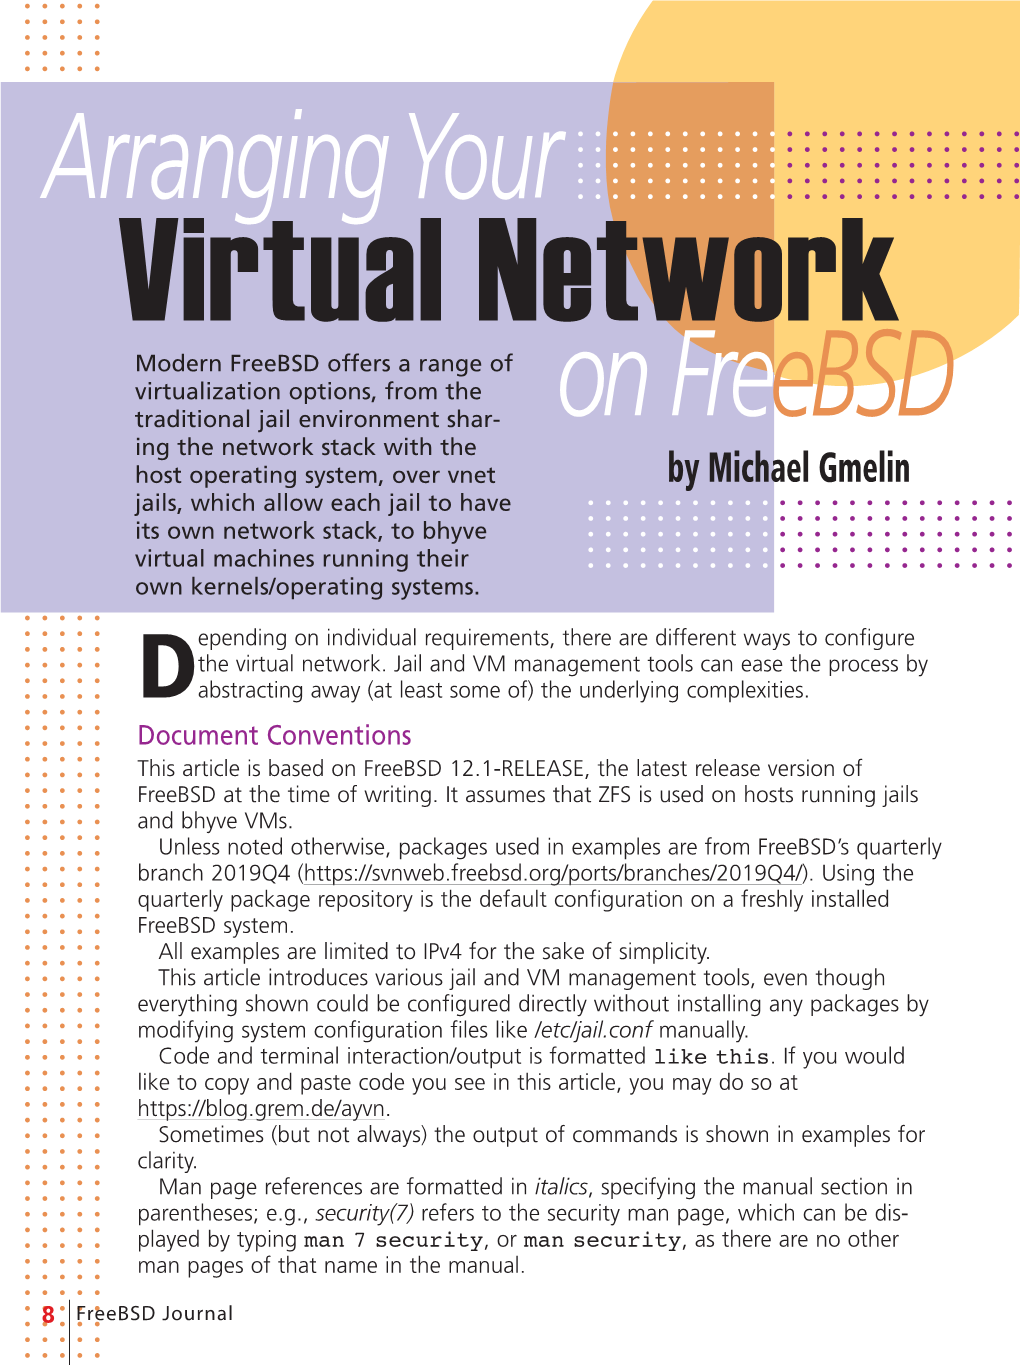 Arranging Your Virtual Network on Freebsd